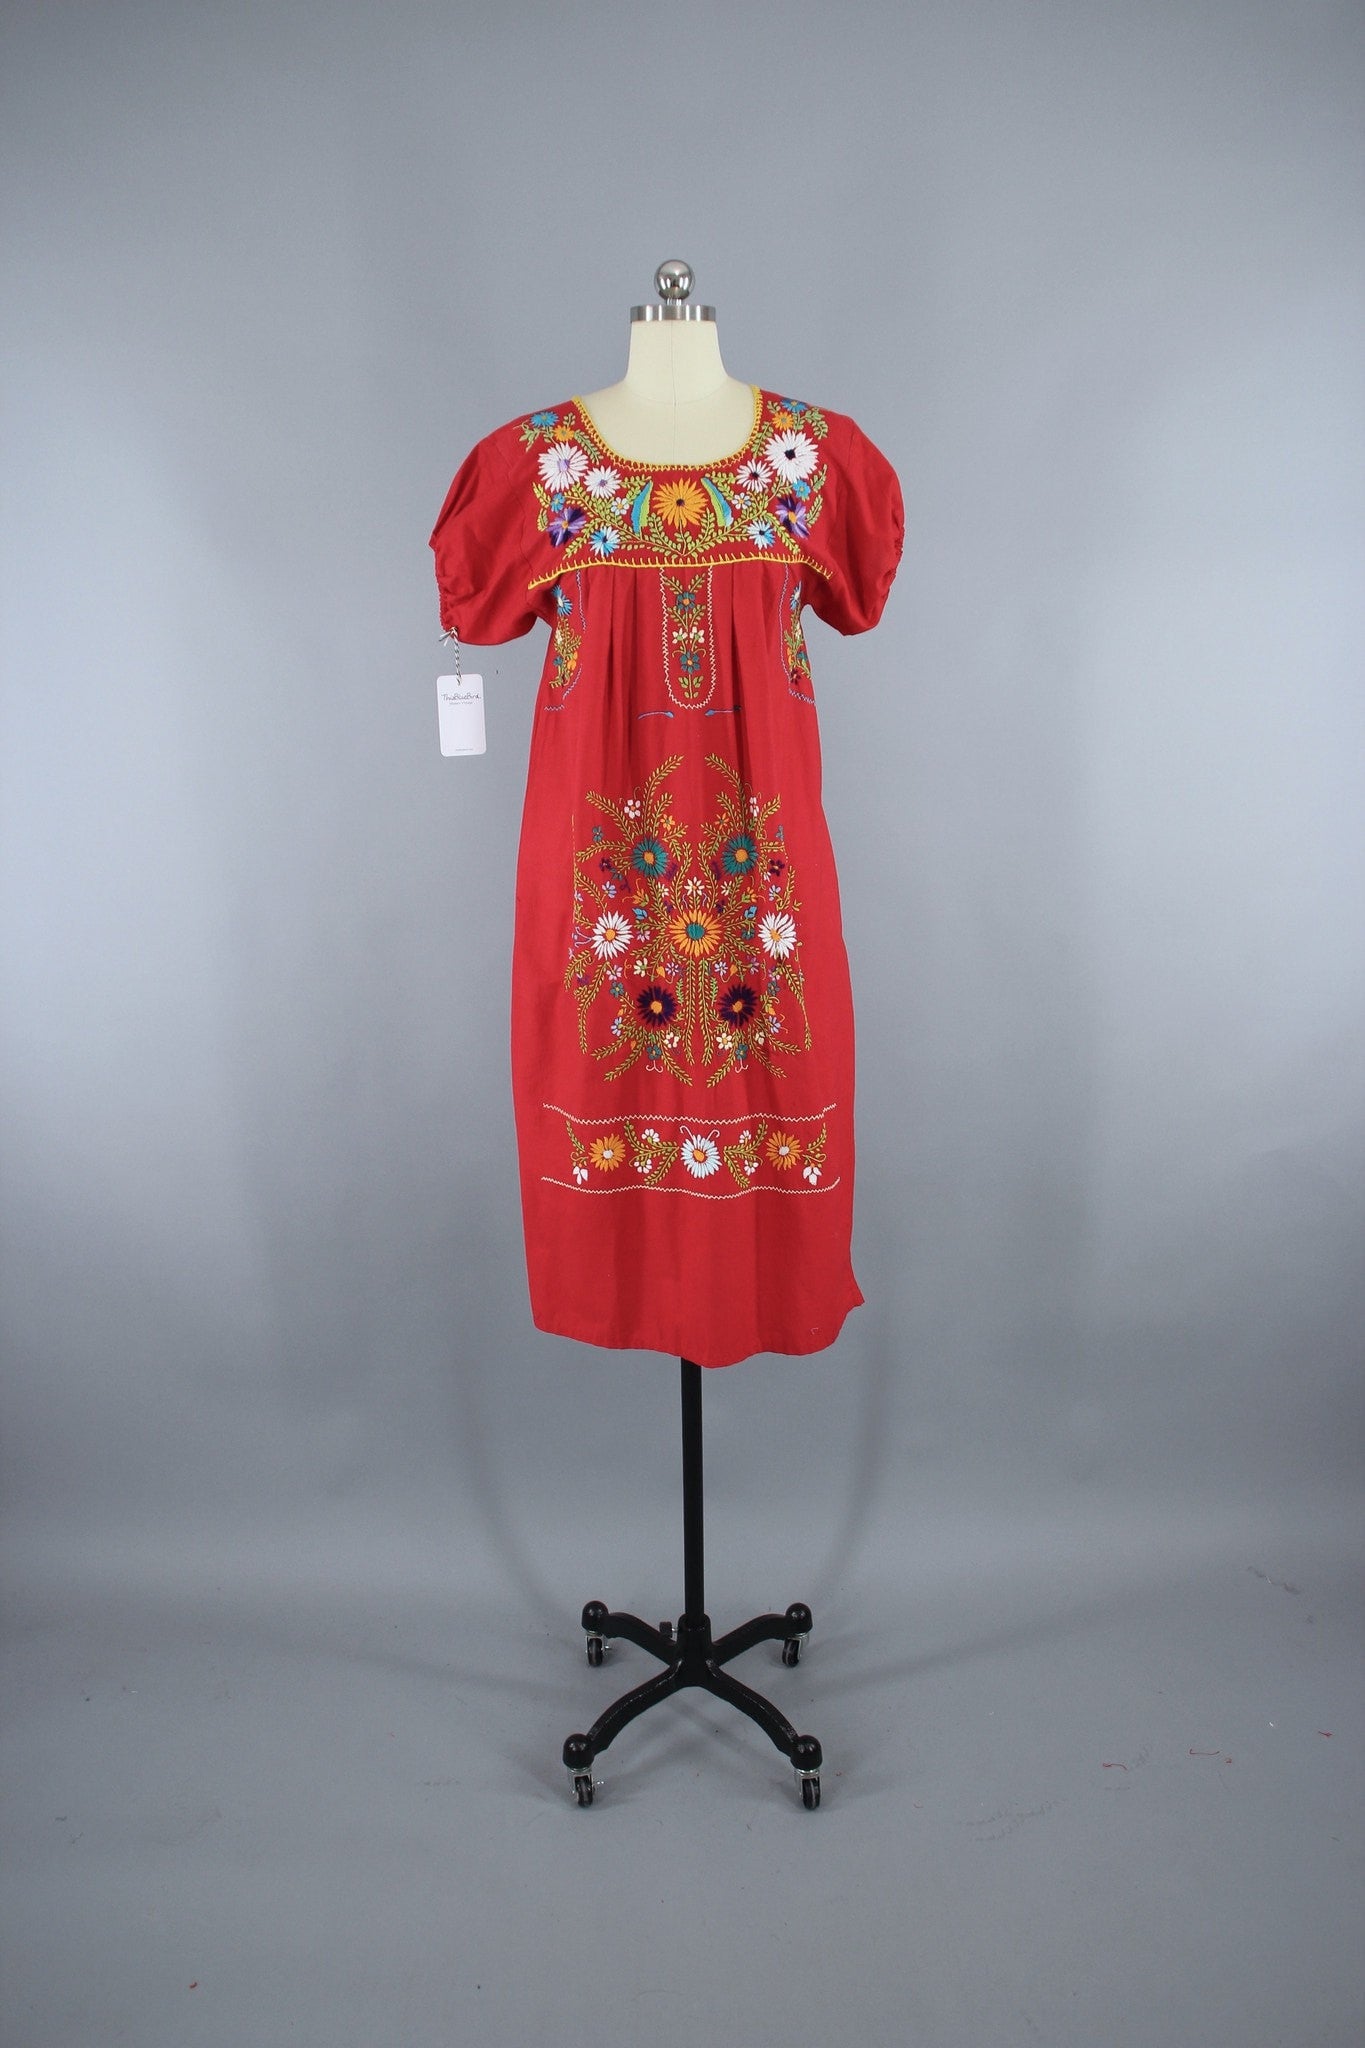 1970s Vintage Red Mexican Oaxacan Embroidered Huipil Caftan Dress - ThisBlueBird